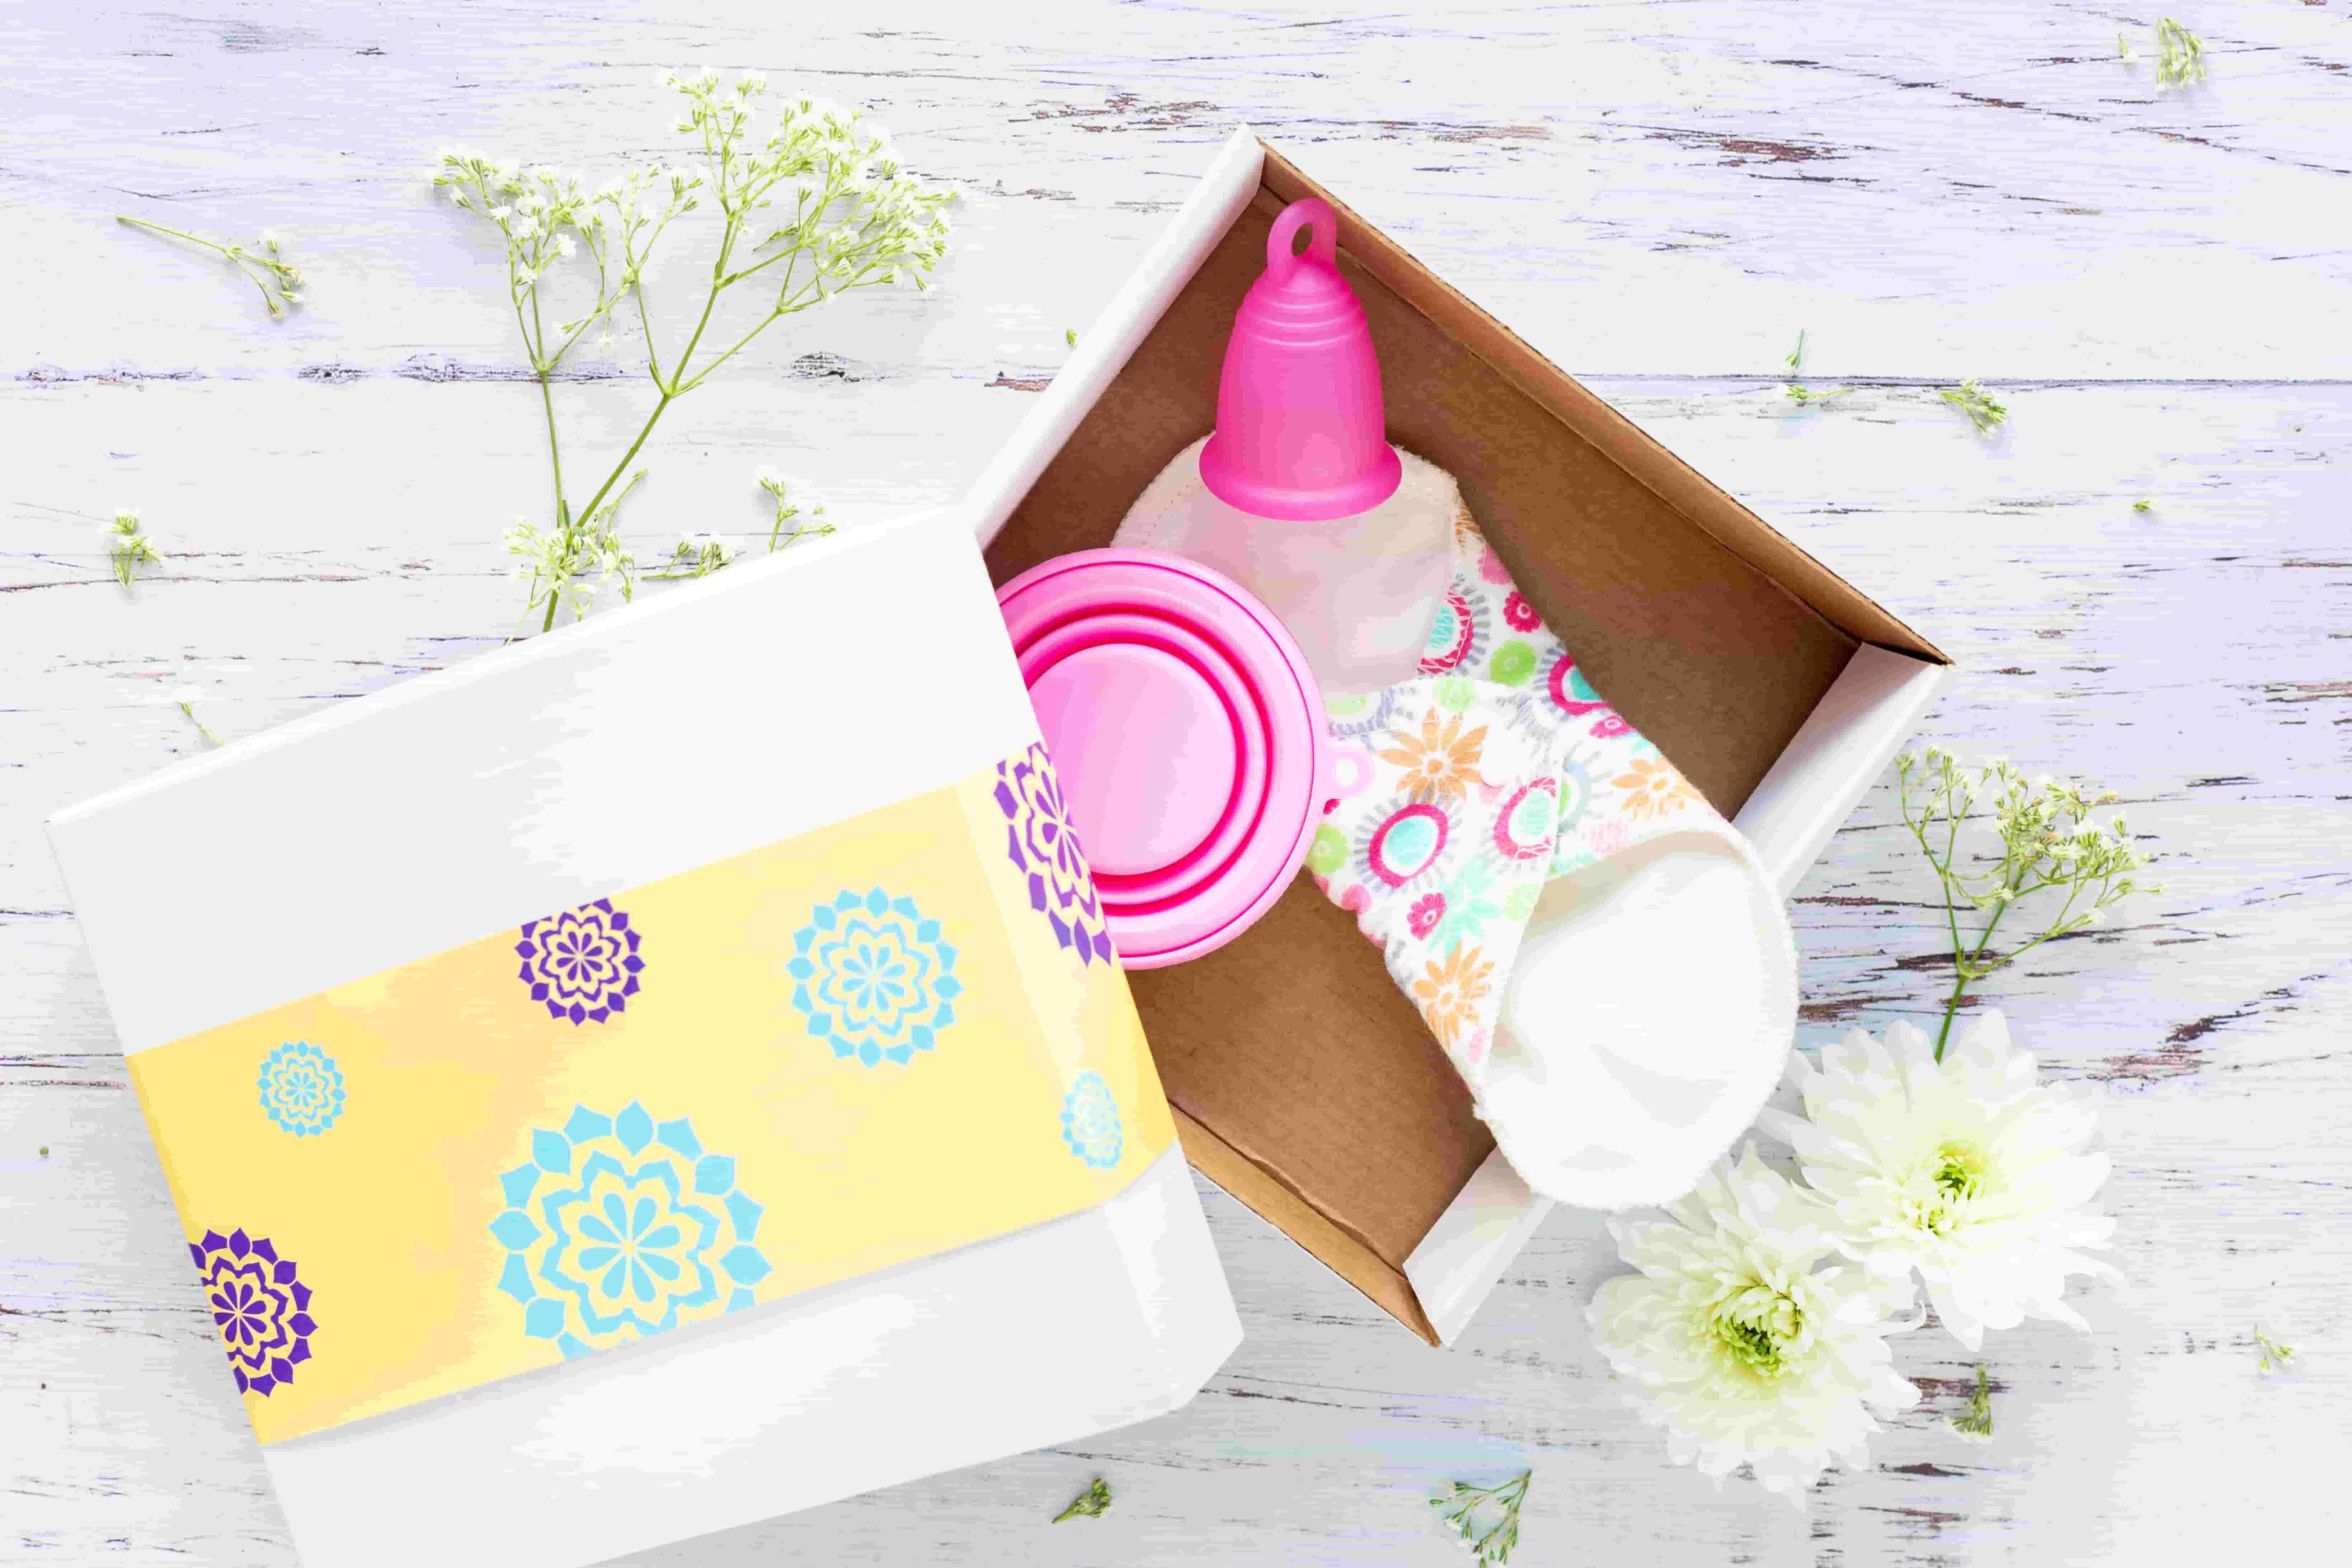 A box sits open with a reusable menstrual cup and pad within it